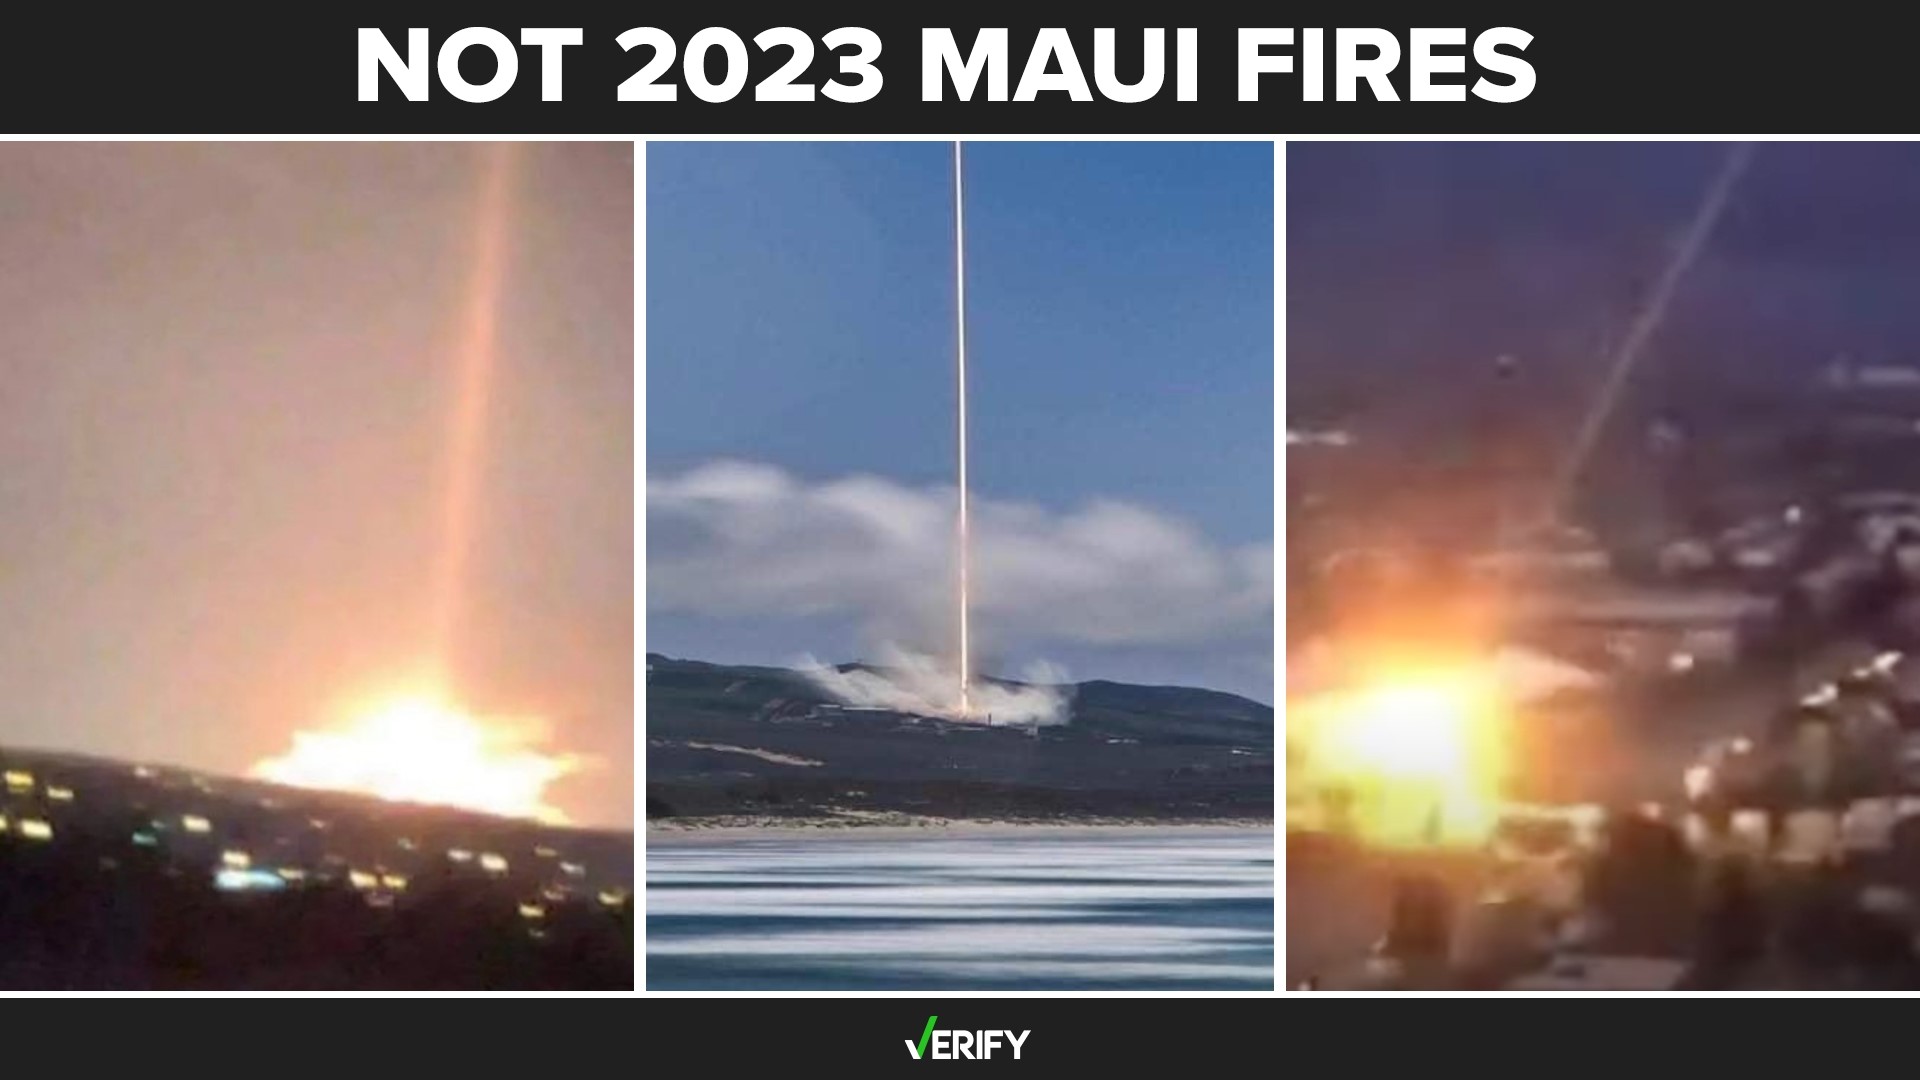 Viral photos of ‘directed energy weapons’ not from Maui fires